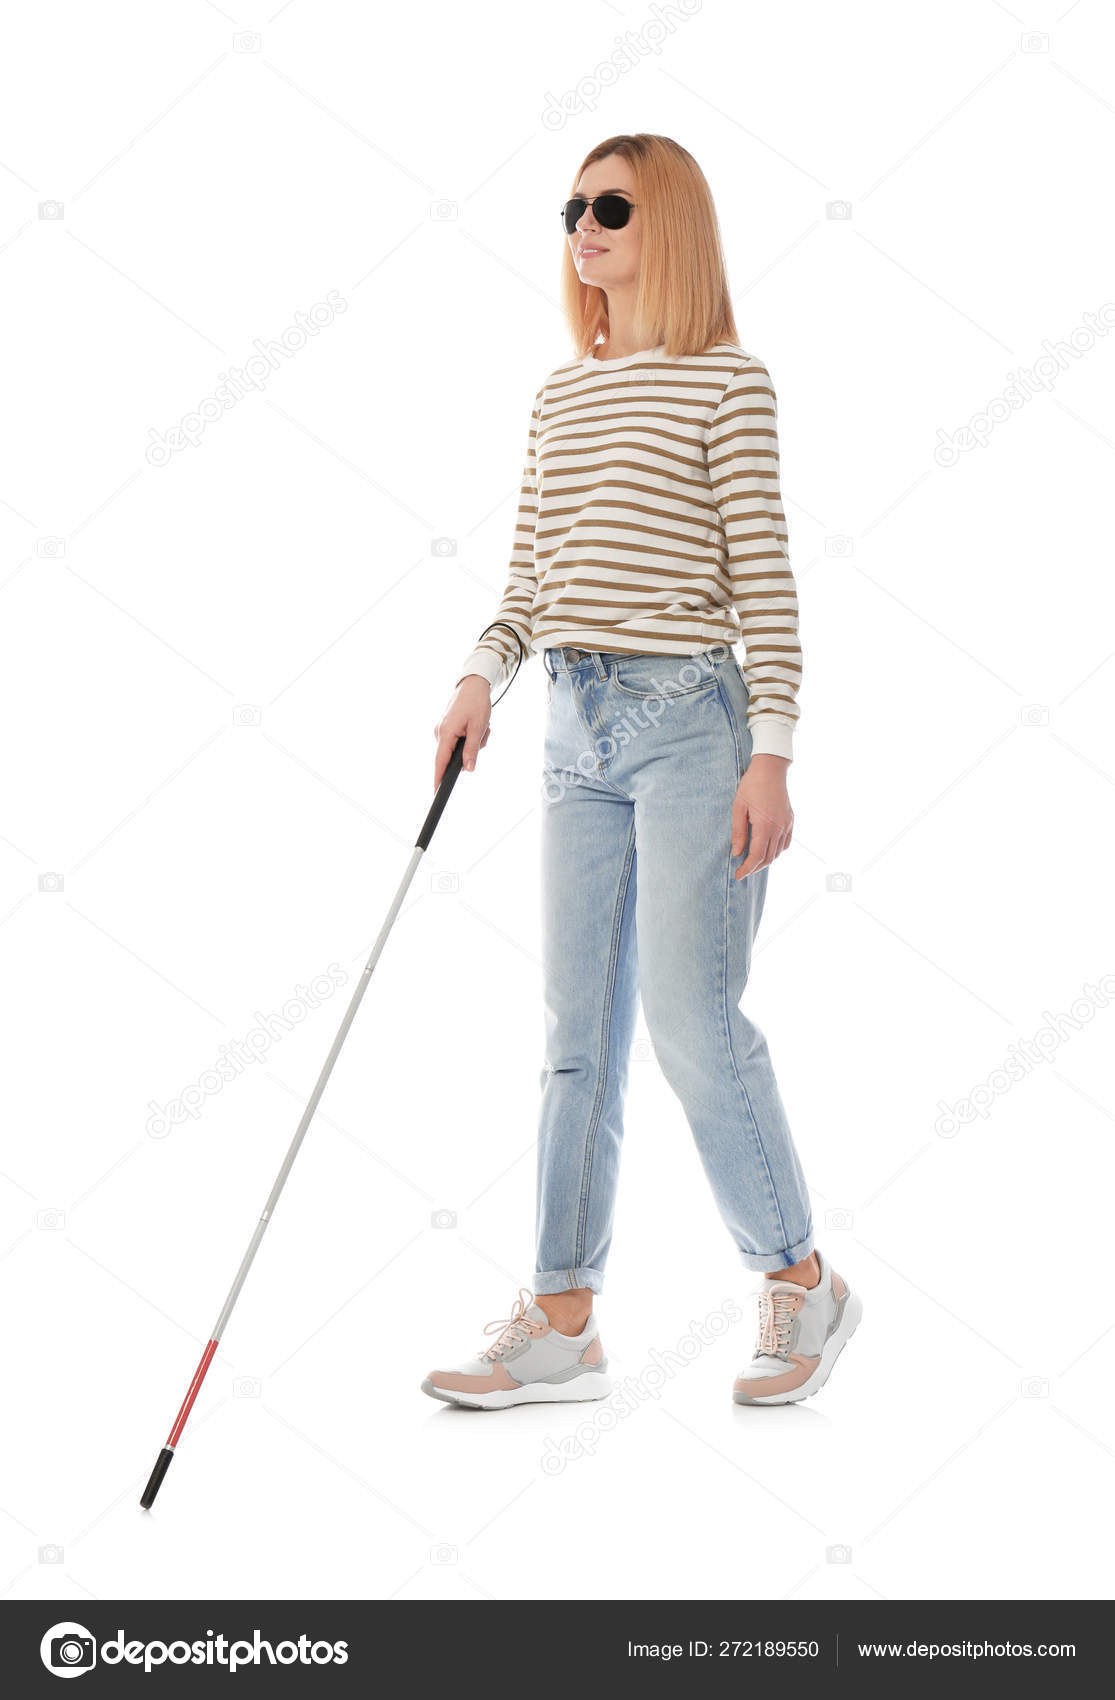 Blind person with long cane walking on white background Stock